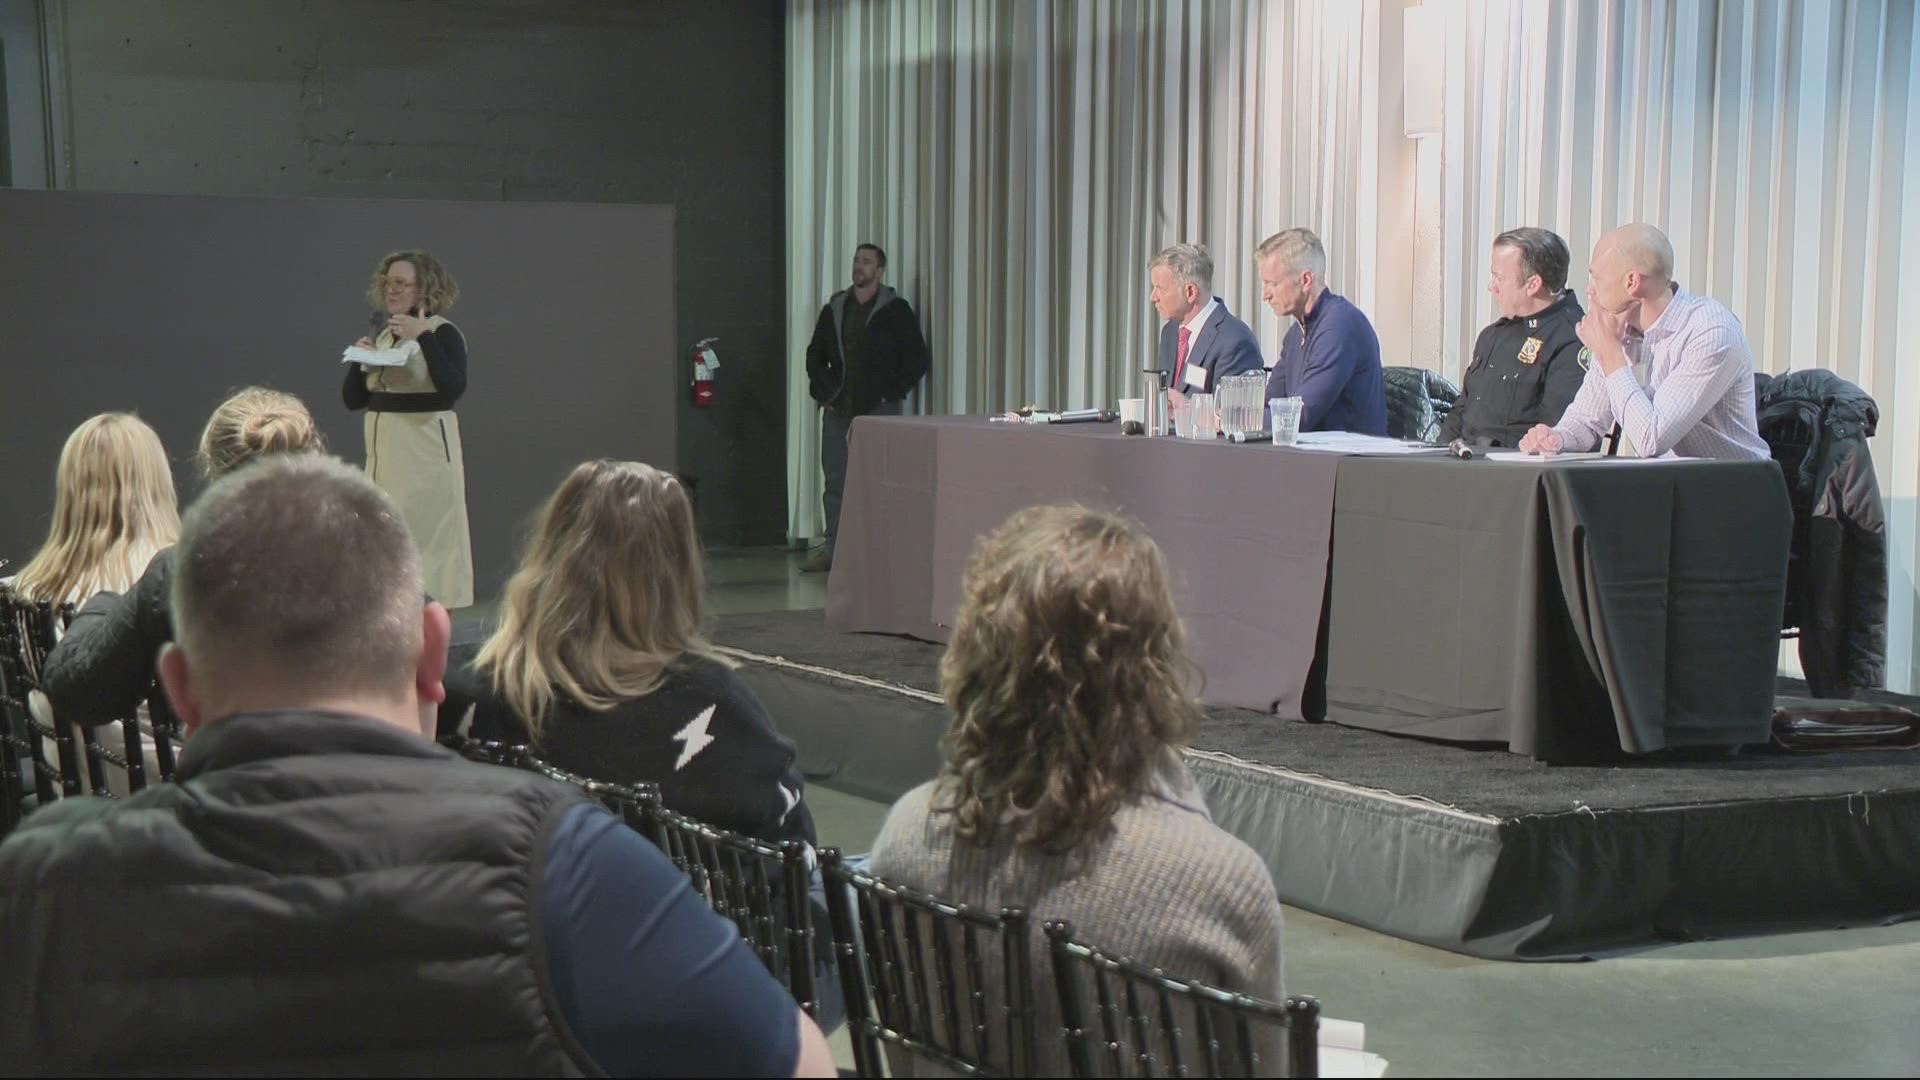 During a listening session Tuesday, Mayor Ted Wheeler presented a 90-day reset plan to help the Central Eastside business community recover and rebound.